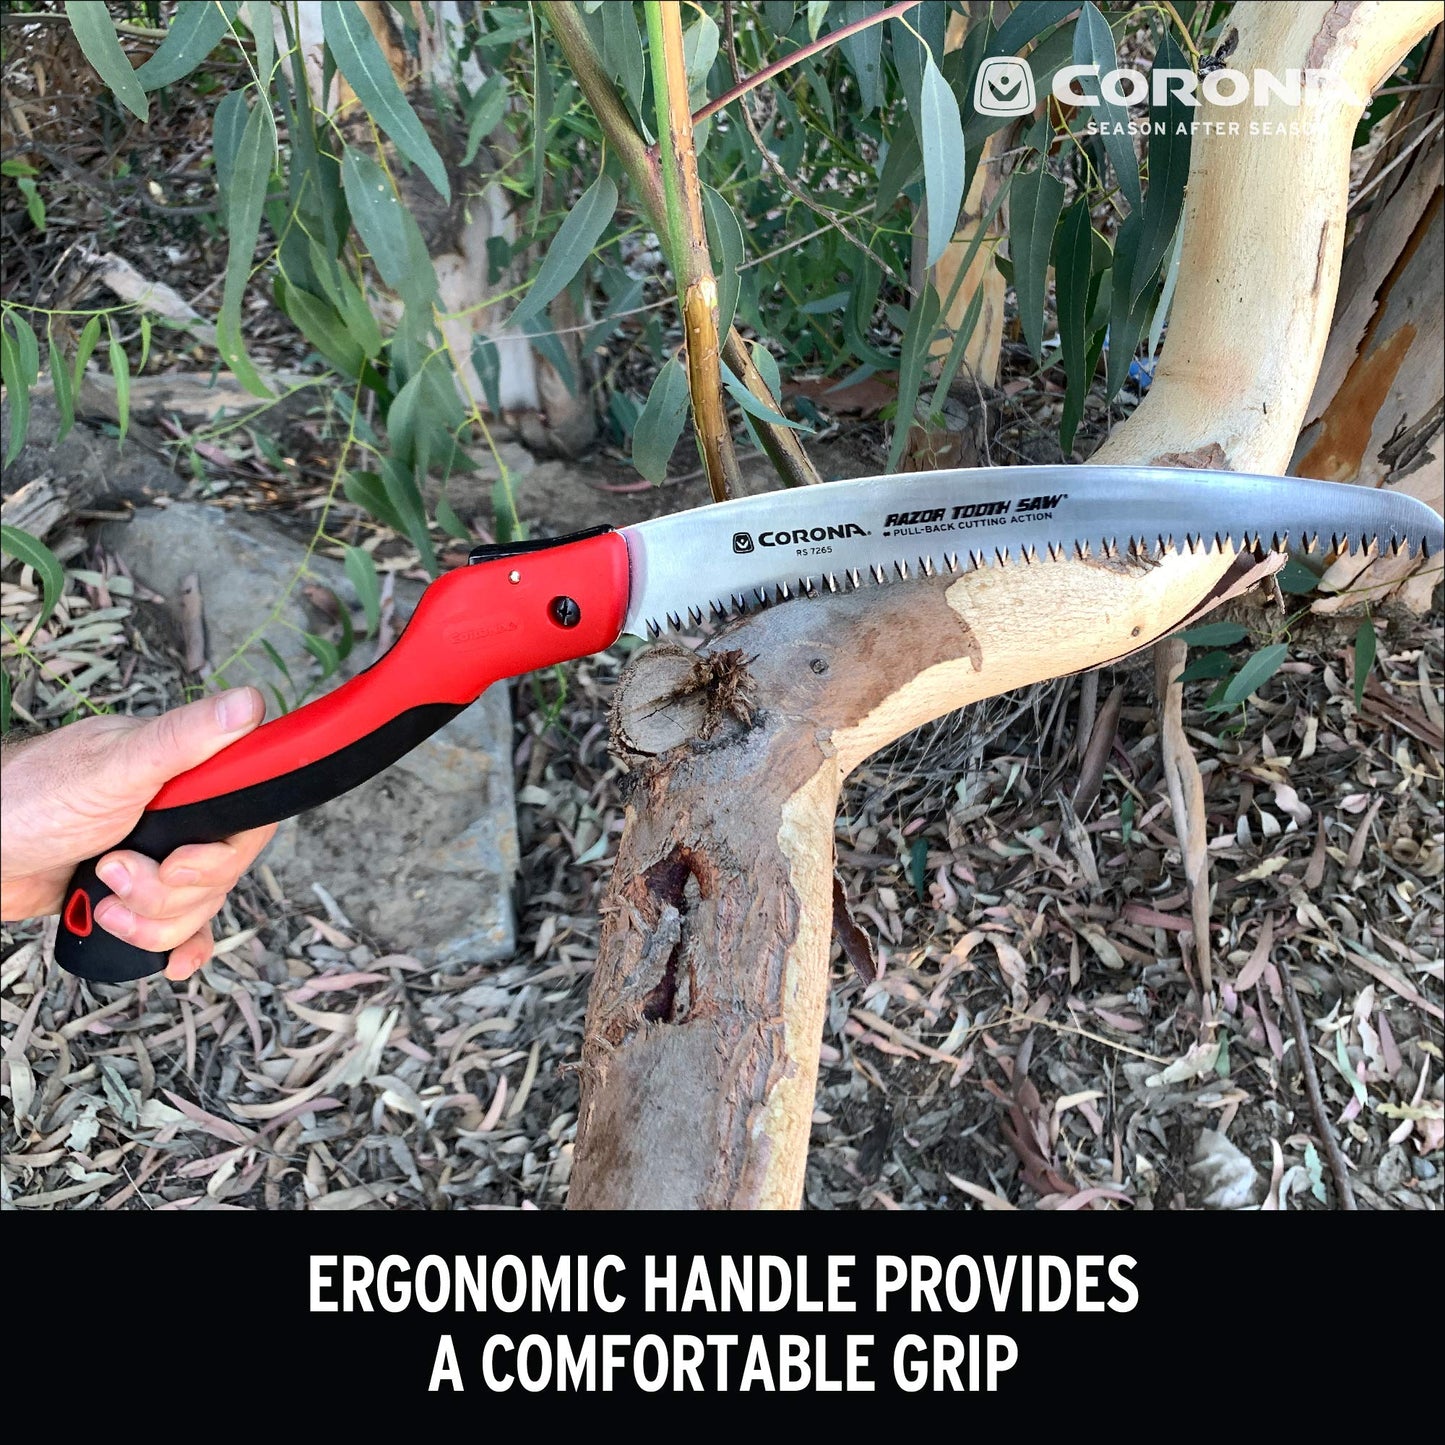 Corona Tools 10-Inch RazorTOOTH Folding Saw | Pruning Saw Designed for Single-Hand Use | Curved Blade Hand Saw | Cuts Branches Up to 6" in Diameter |